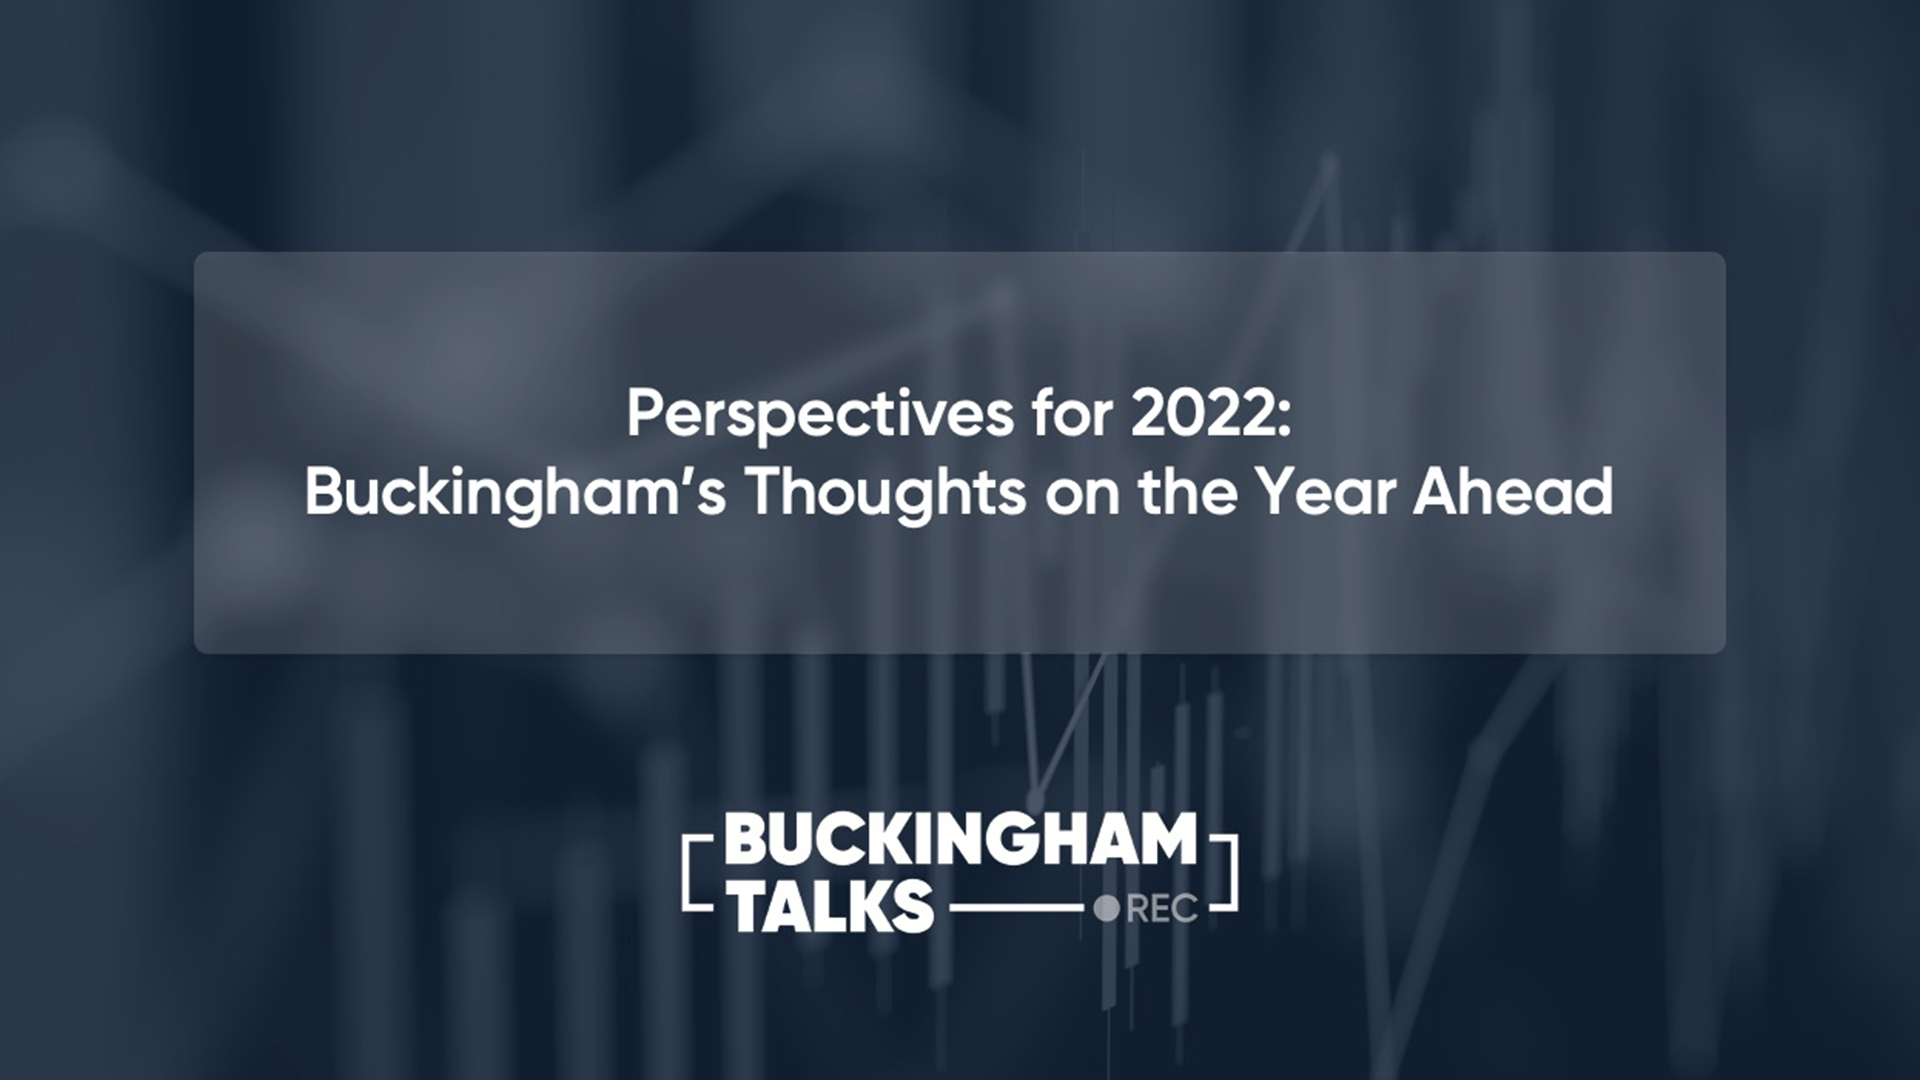 Perspectives for 2022: Buckingham’s Thoughts on the Year Ahead